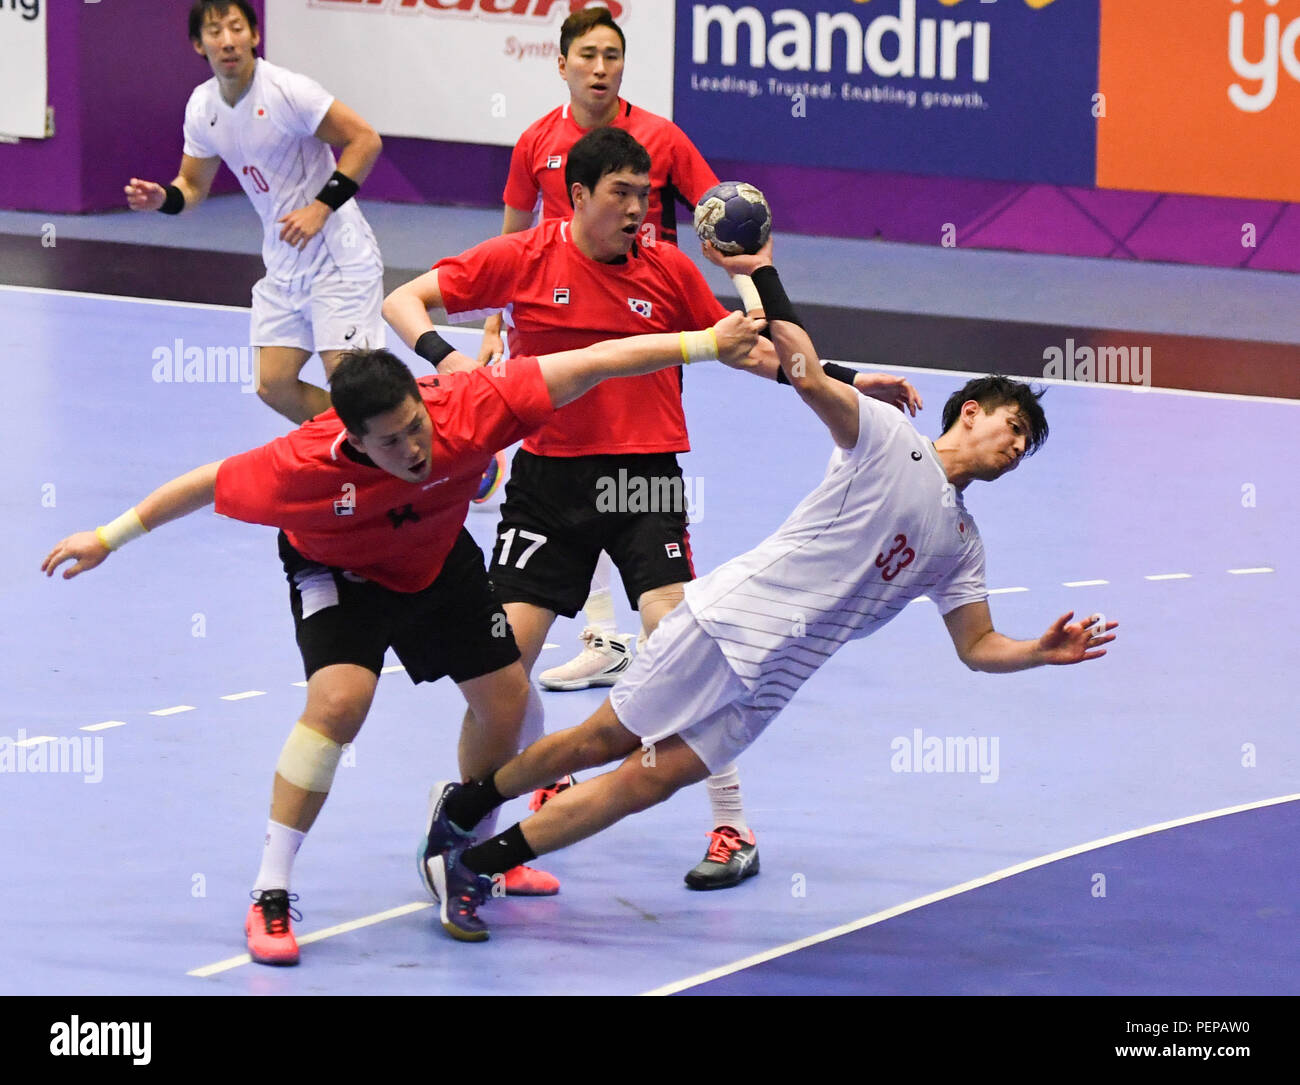 Jakarta. 17th Aug, 2018. Agarie Yuto (1st R) of Japan competes during the Men's Handball Preliminary Round Group B match between Japan and South Korea at the Asian Games 2018 in Jakarta, Indonesia on Aug. 17, 2018. The match ended with a 26-26 draw. Credit: Li He/Xinhua/Alamy Live News Stock Photo